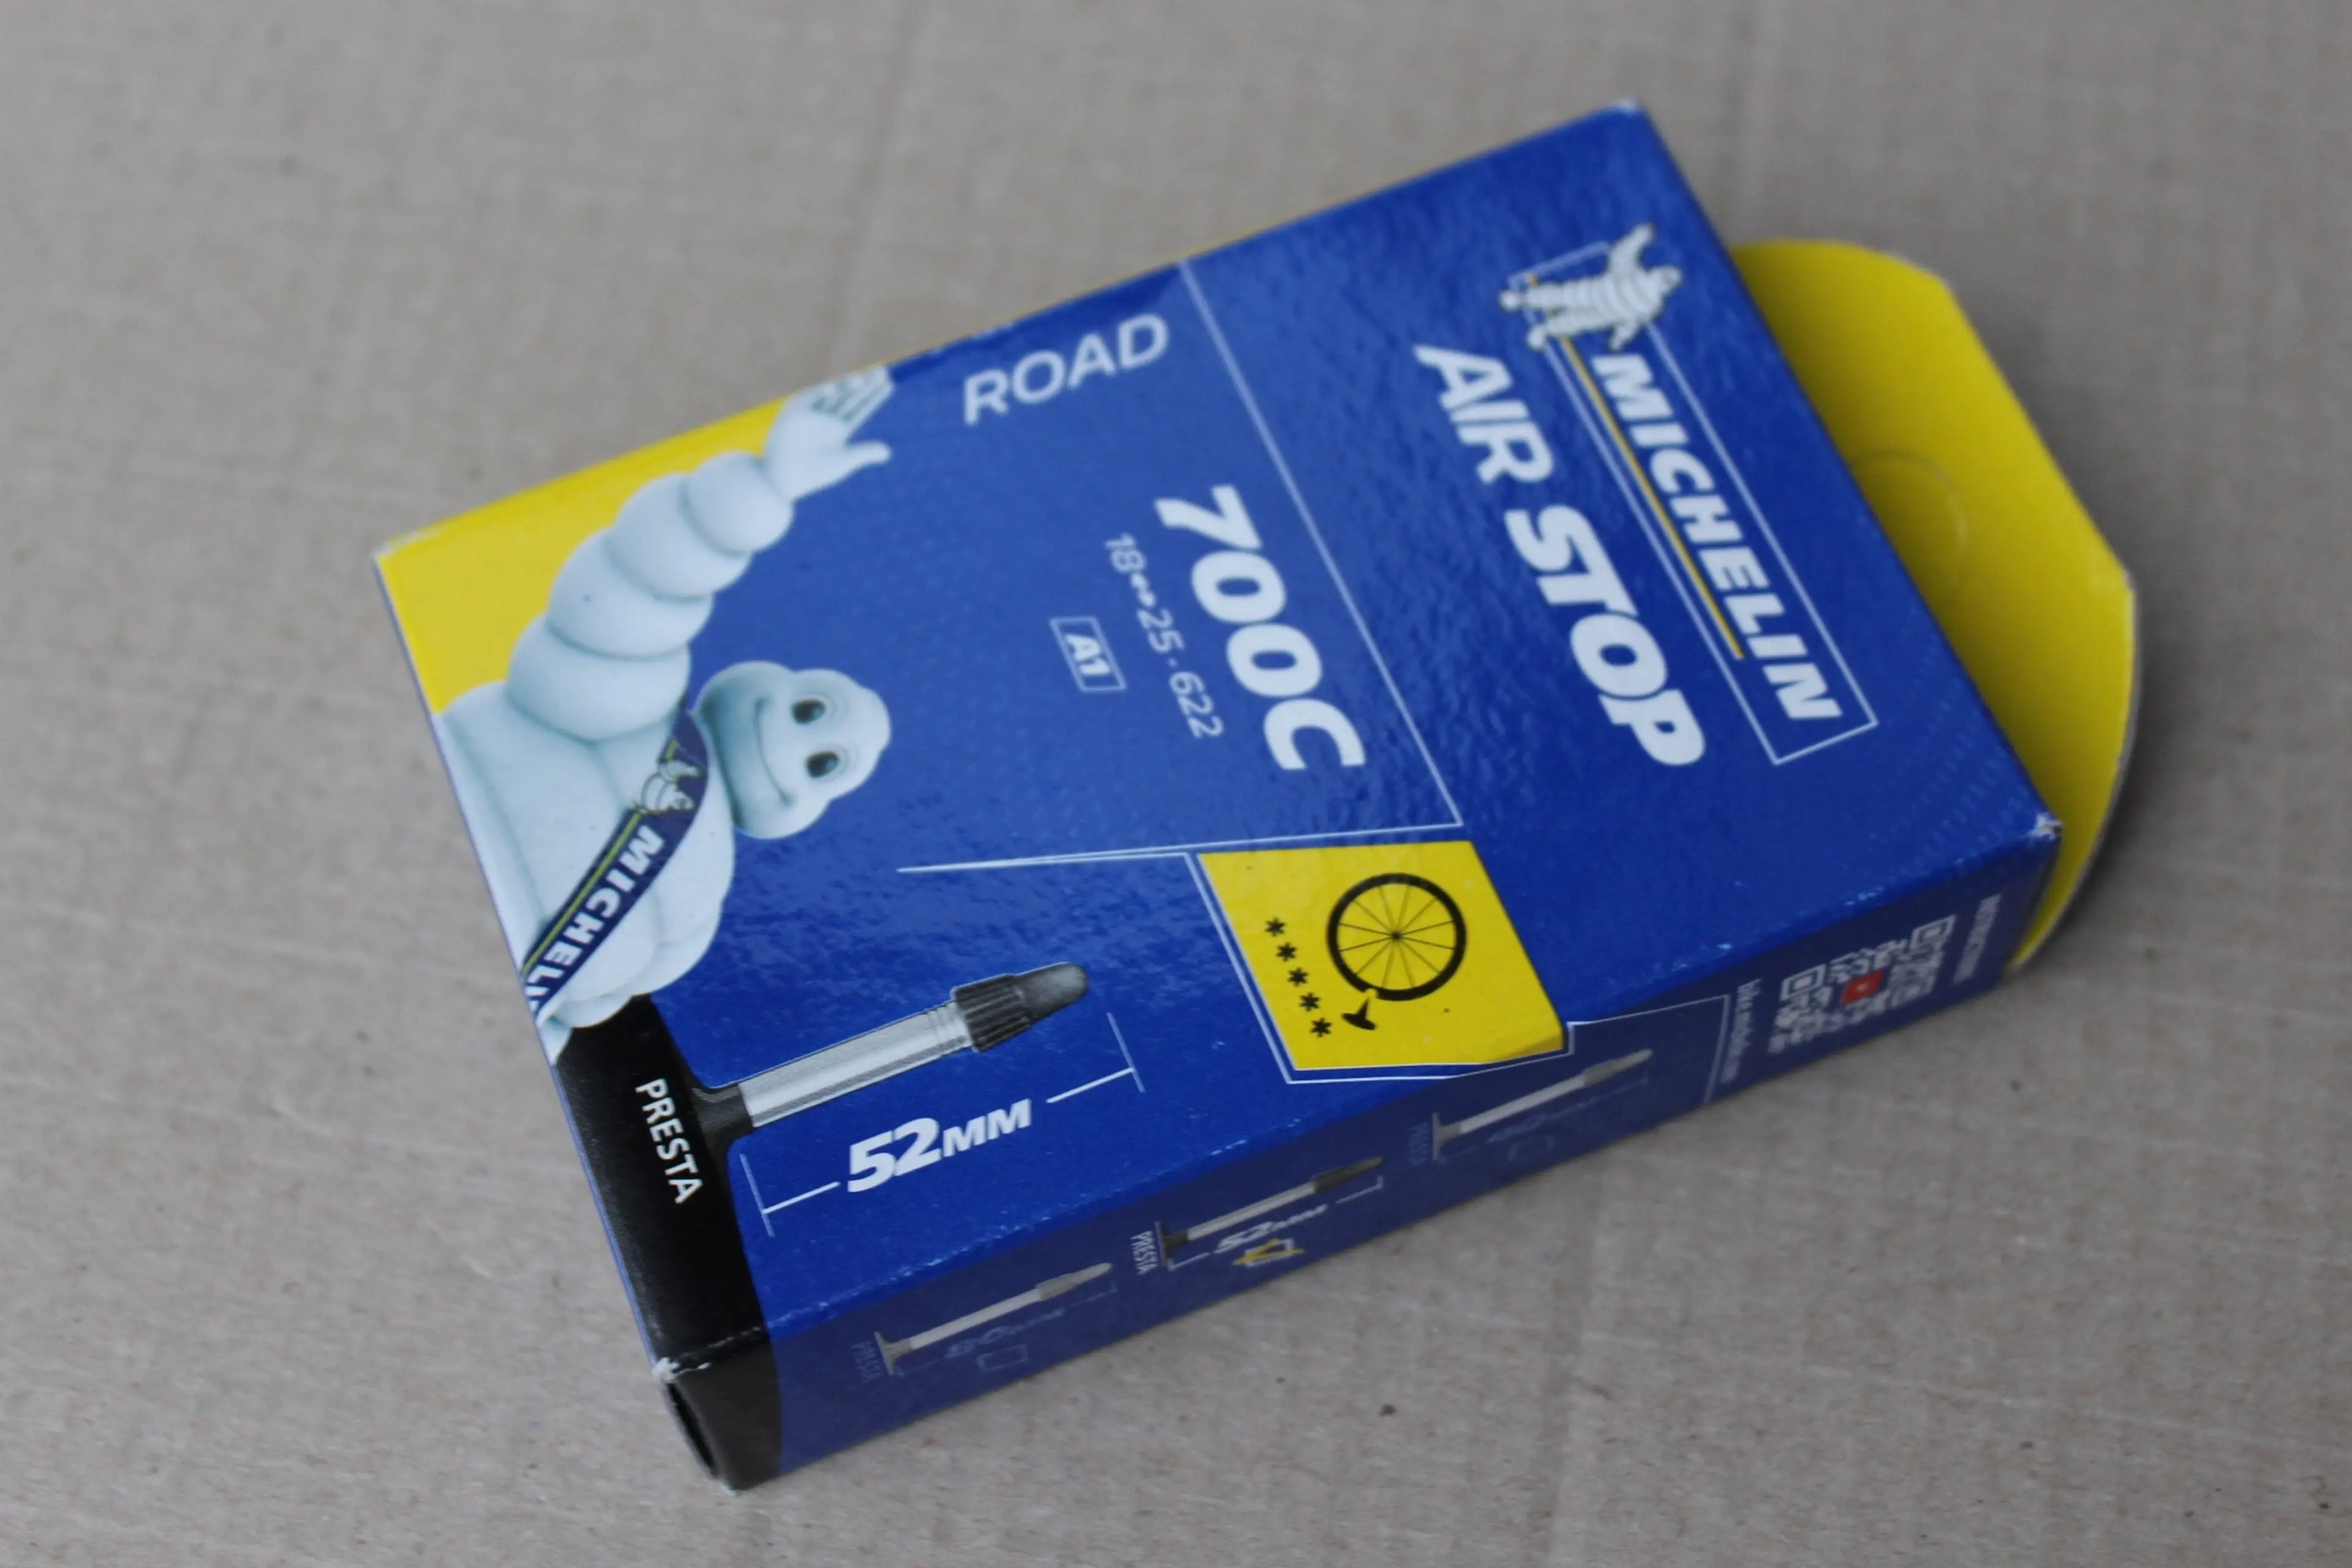 1. Michelin A1 Airstop Road 18/25-622 FV52mm - 700c